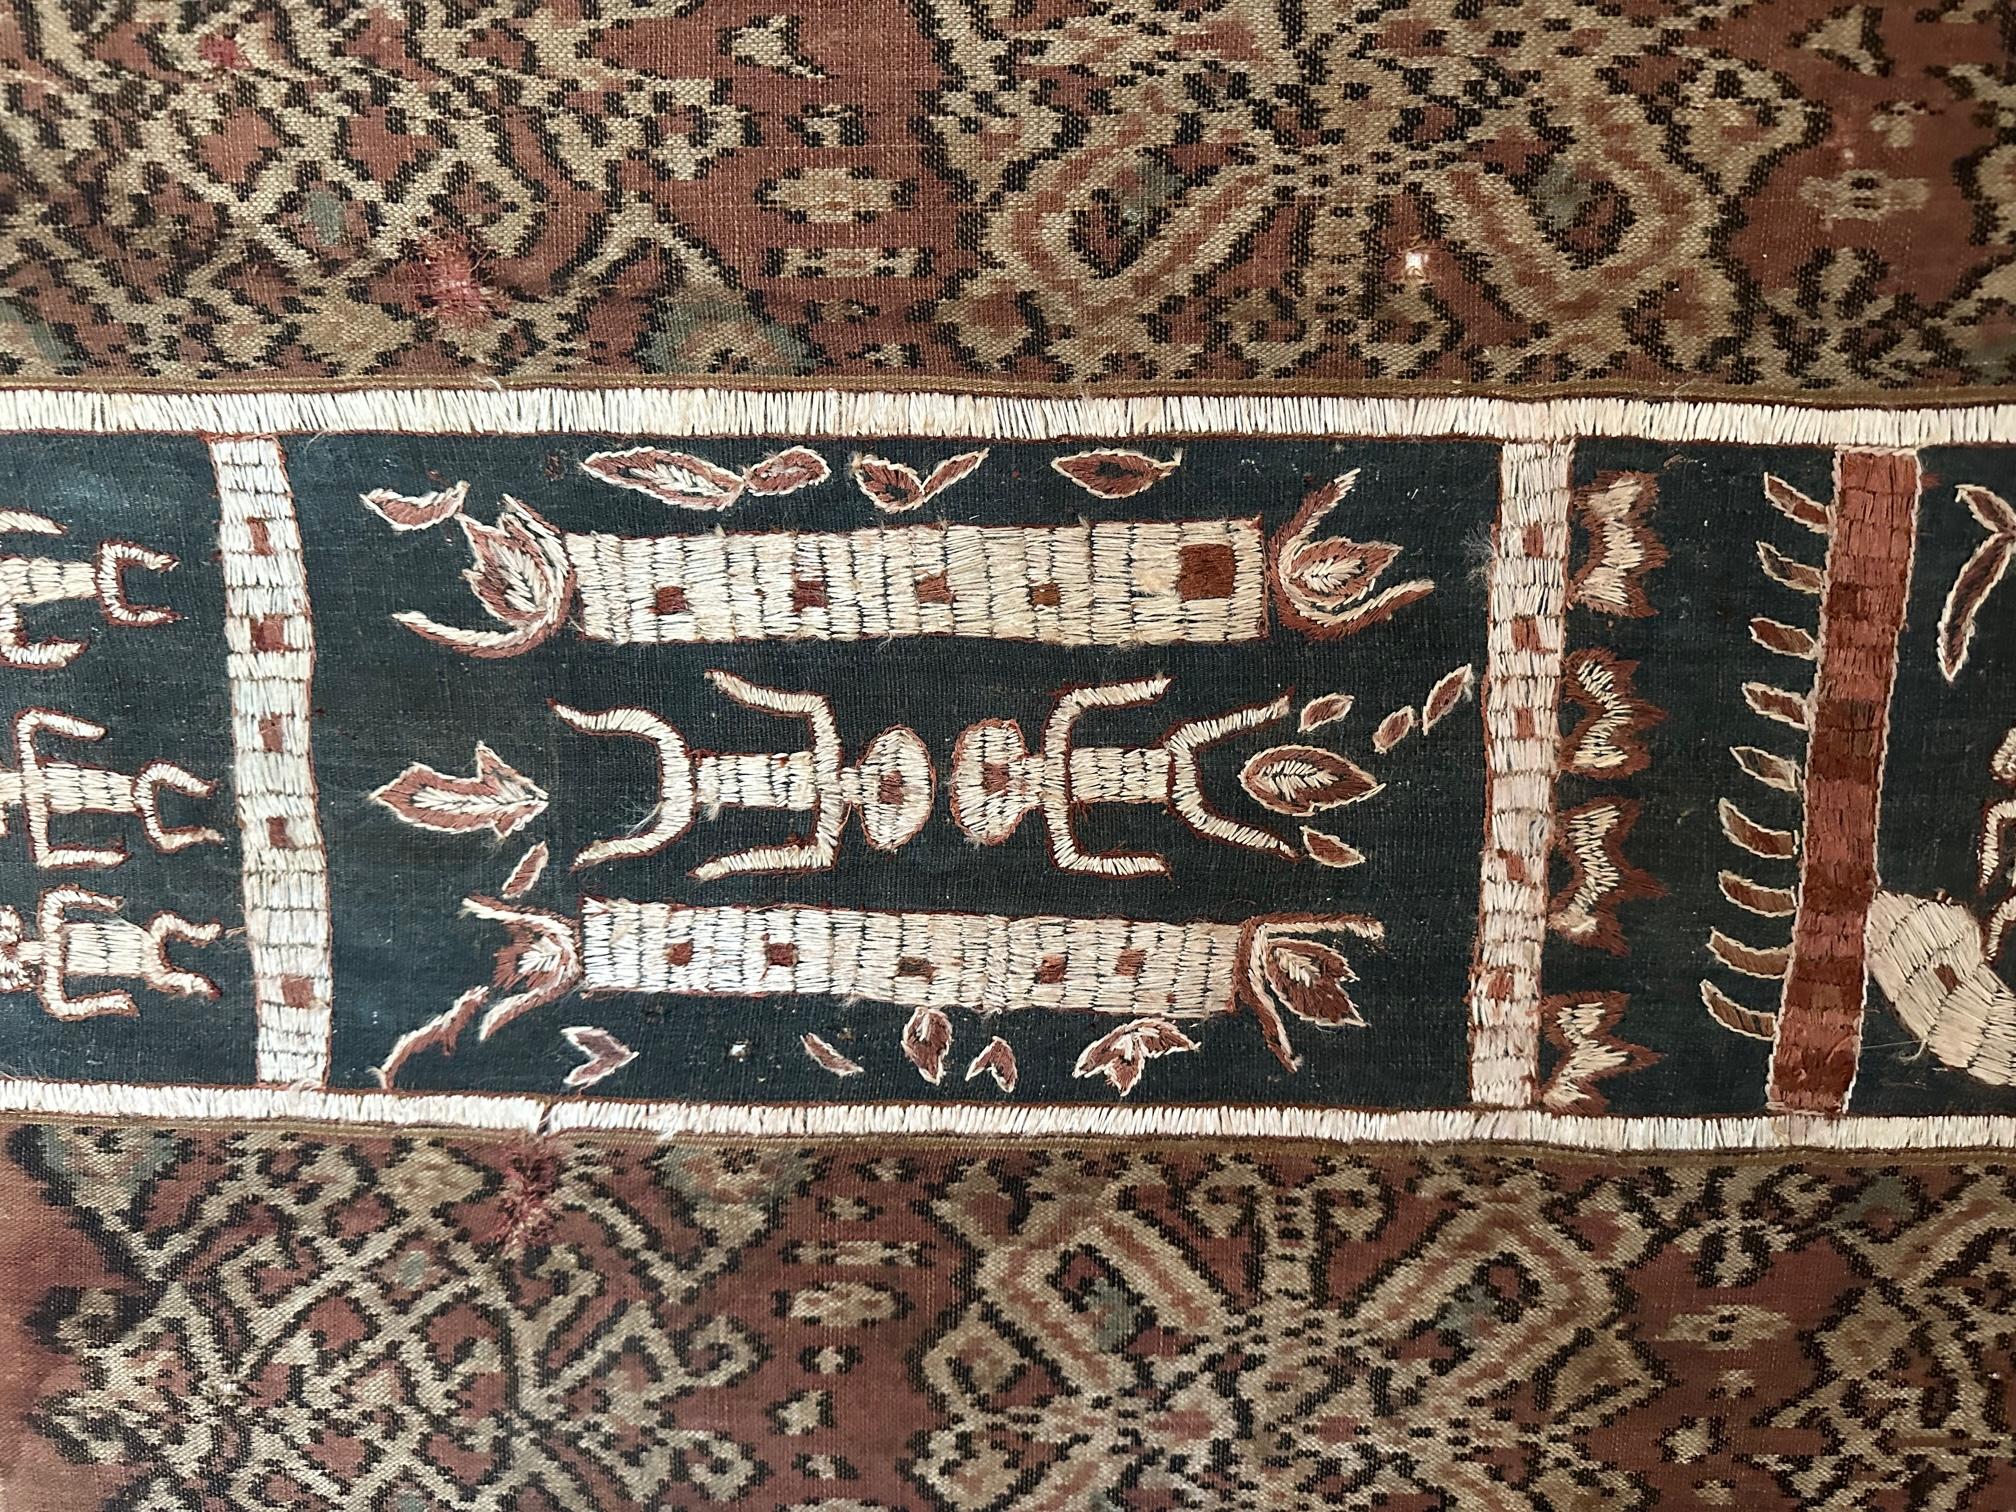 20th Century Ikat and Embroidery Textile Panel from Sumatra Indonesia For Sale